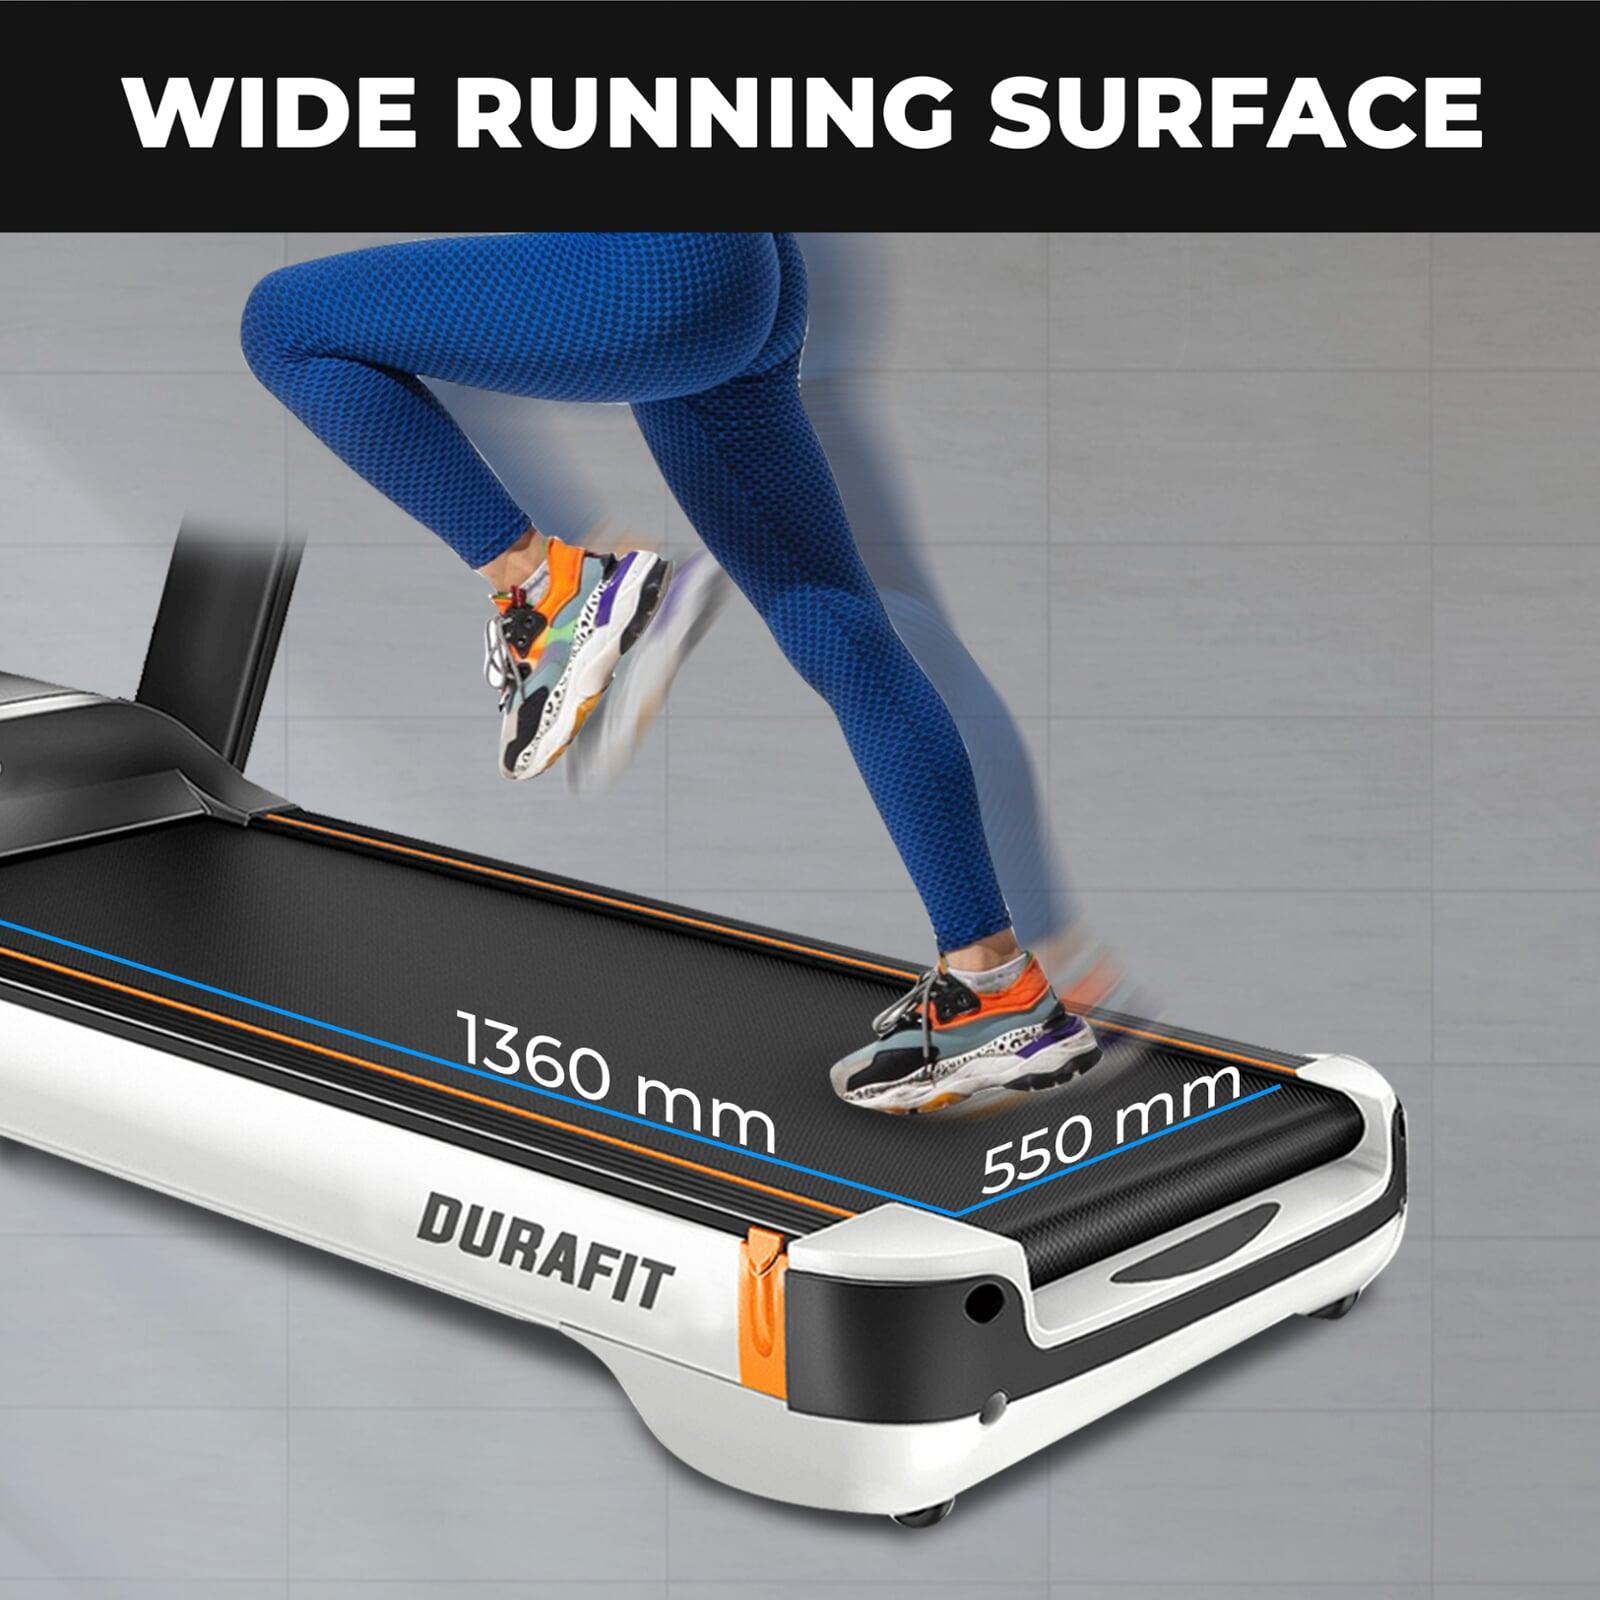 Durafit Focus Multifunction Treadmill with Wide Running Surface